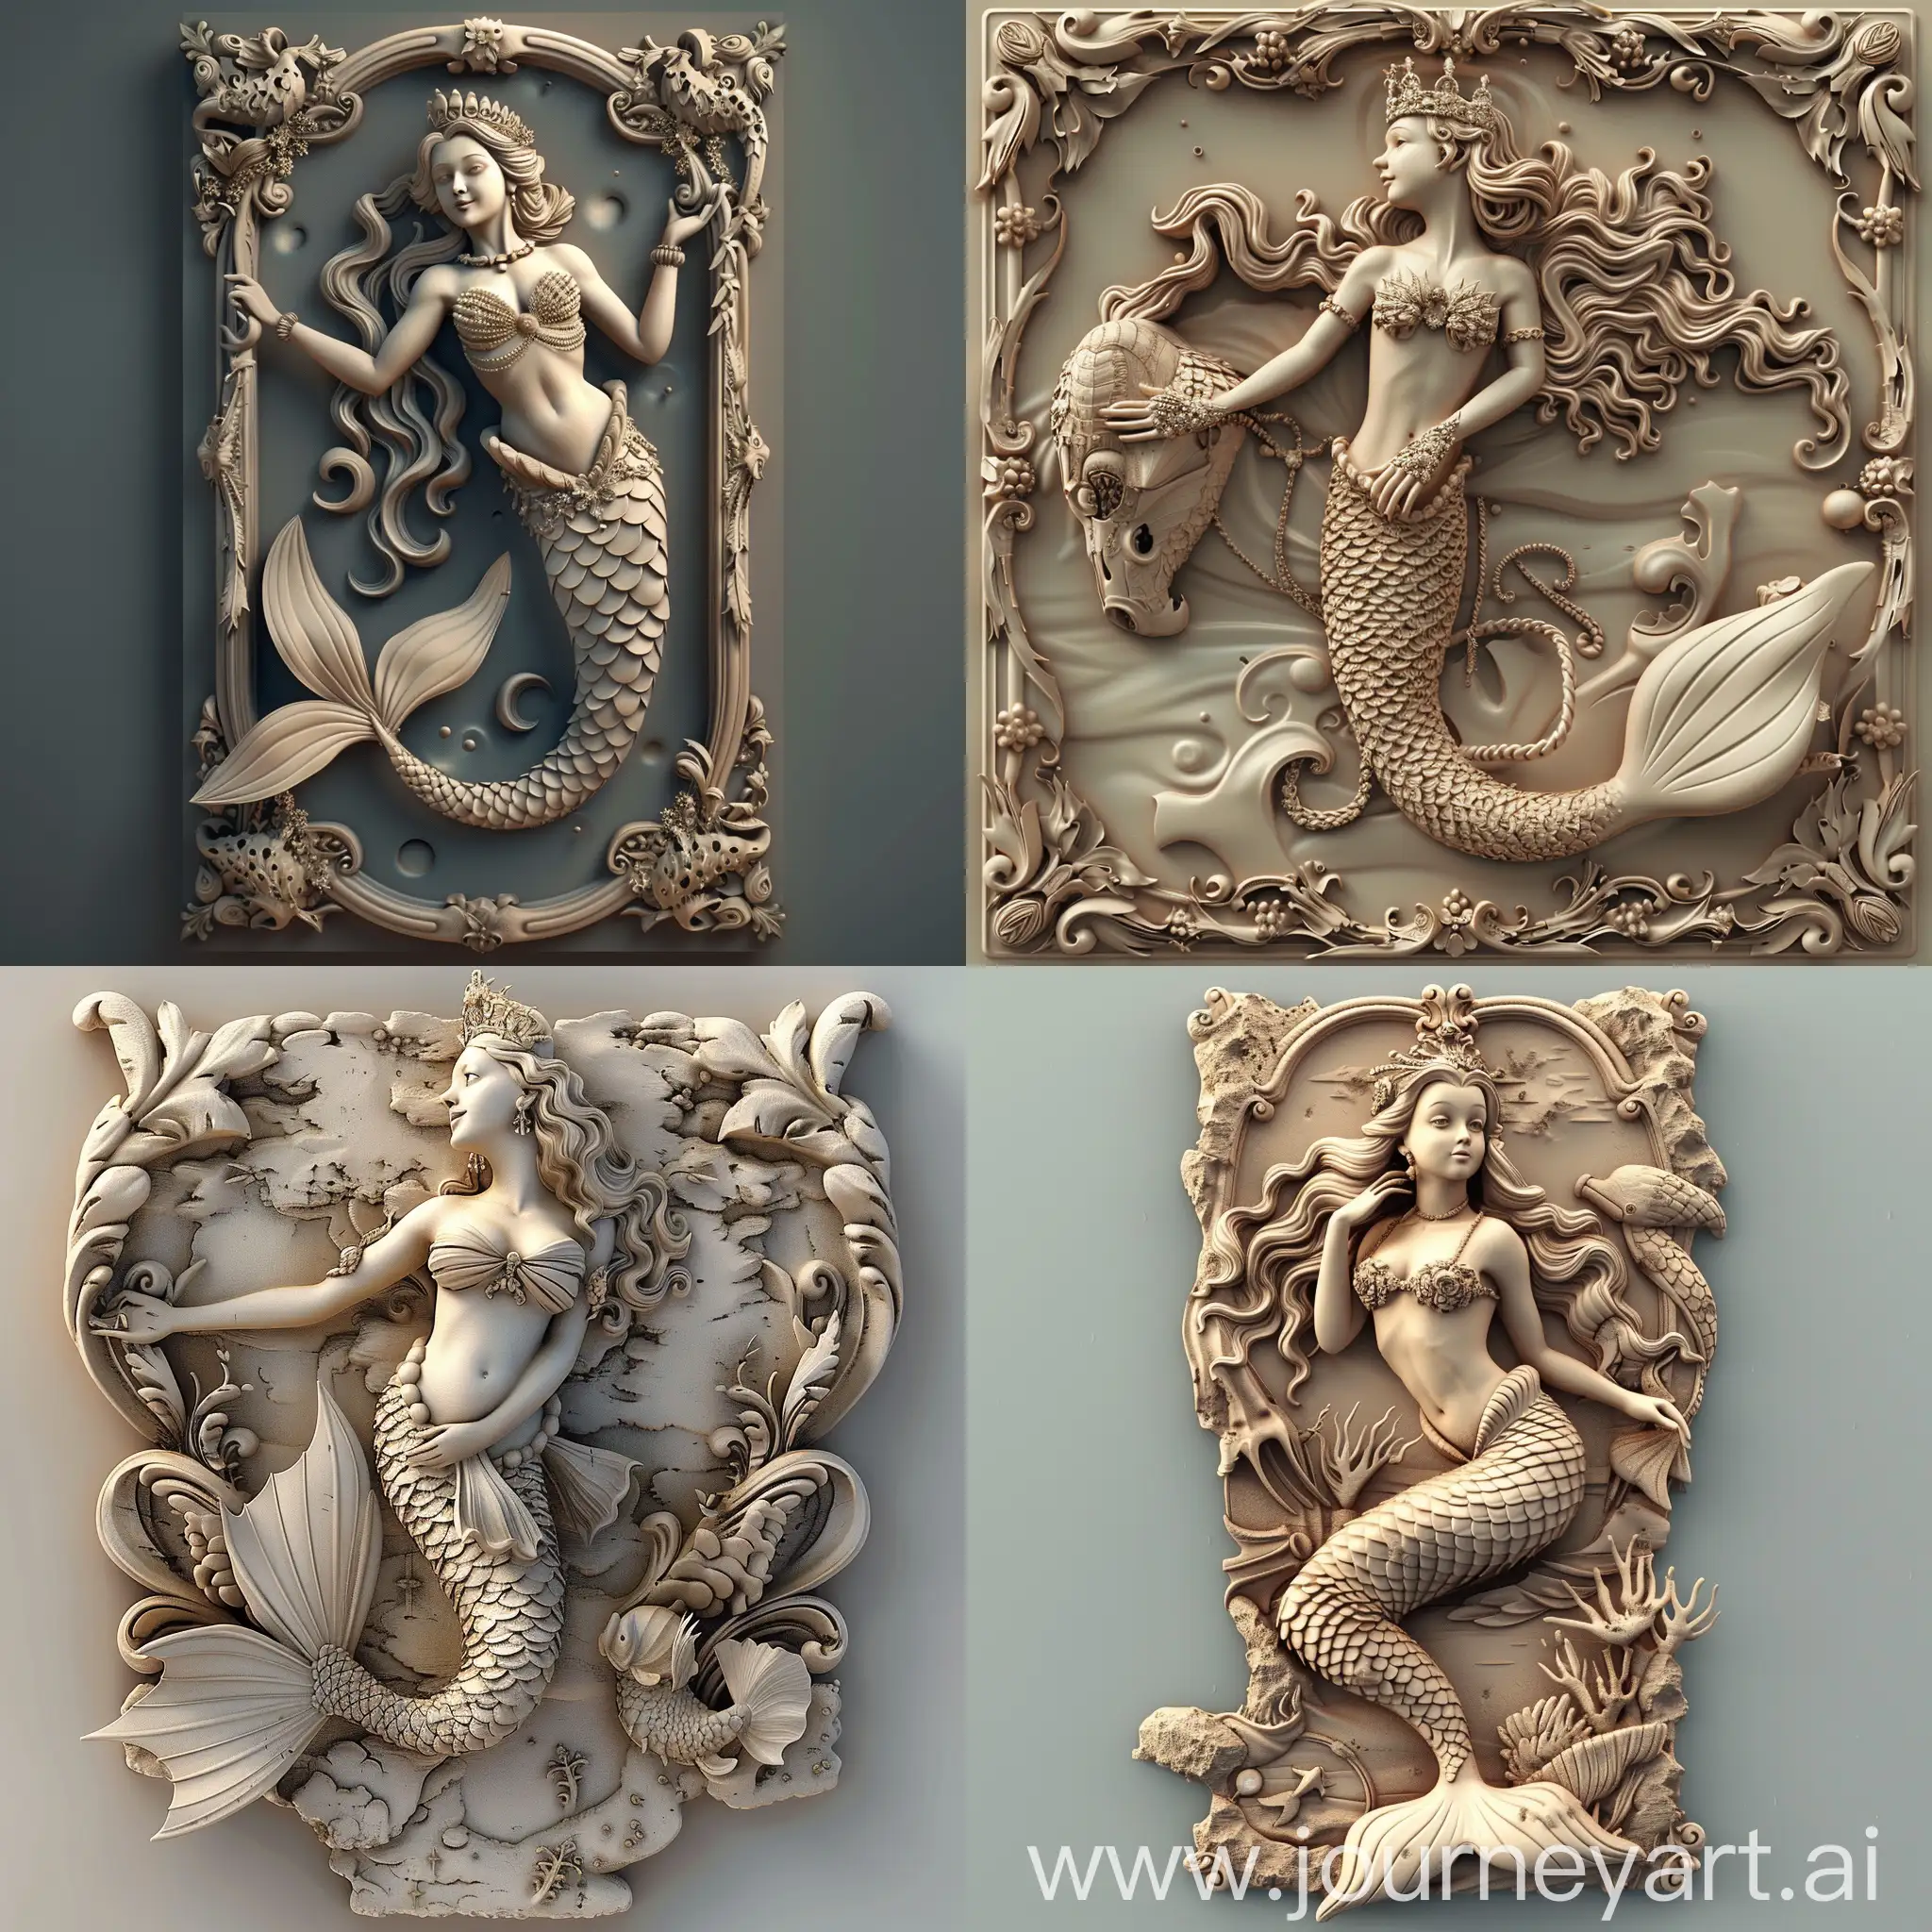 Cartoonstyle-High-Detail-3D-Bas-Relief-of-a-Queen-Mermaid